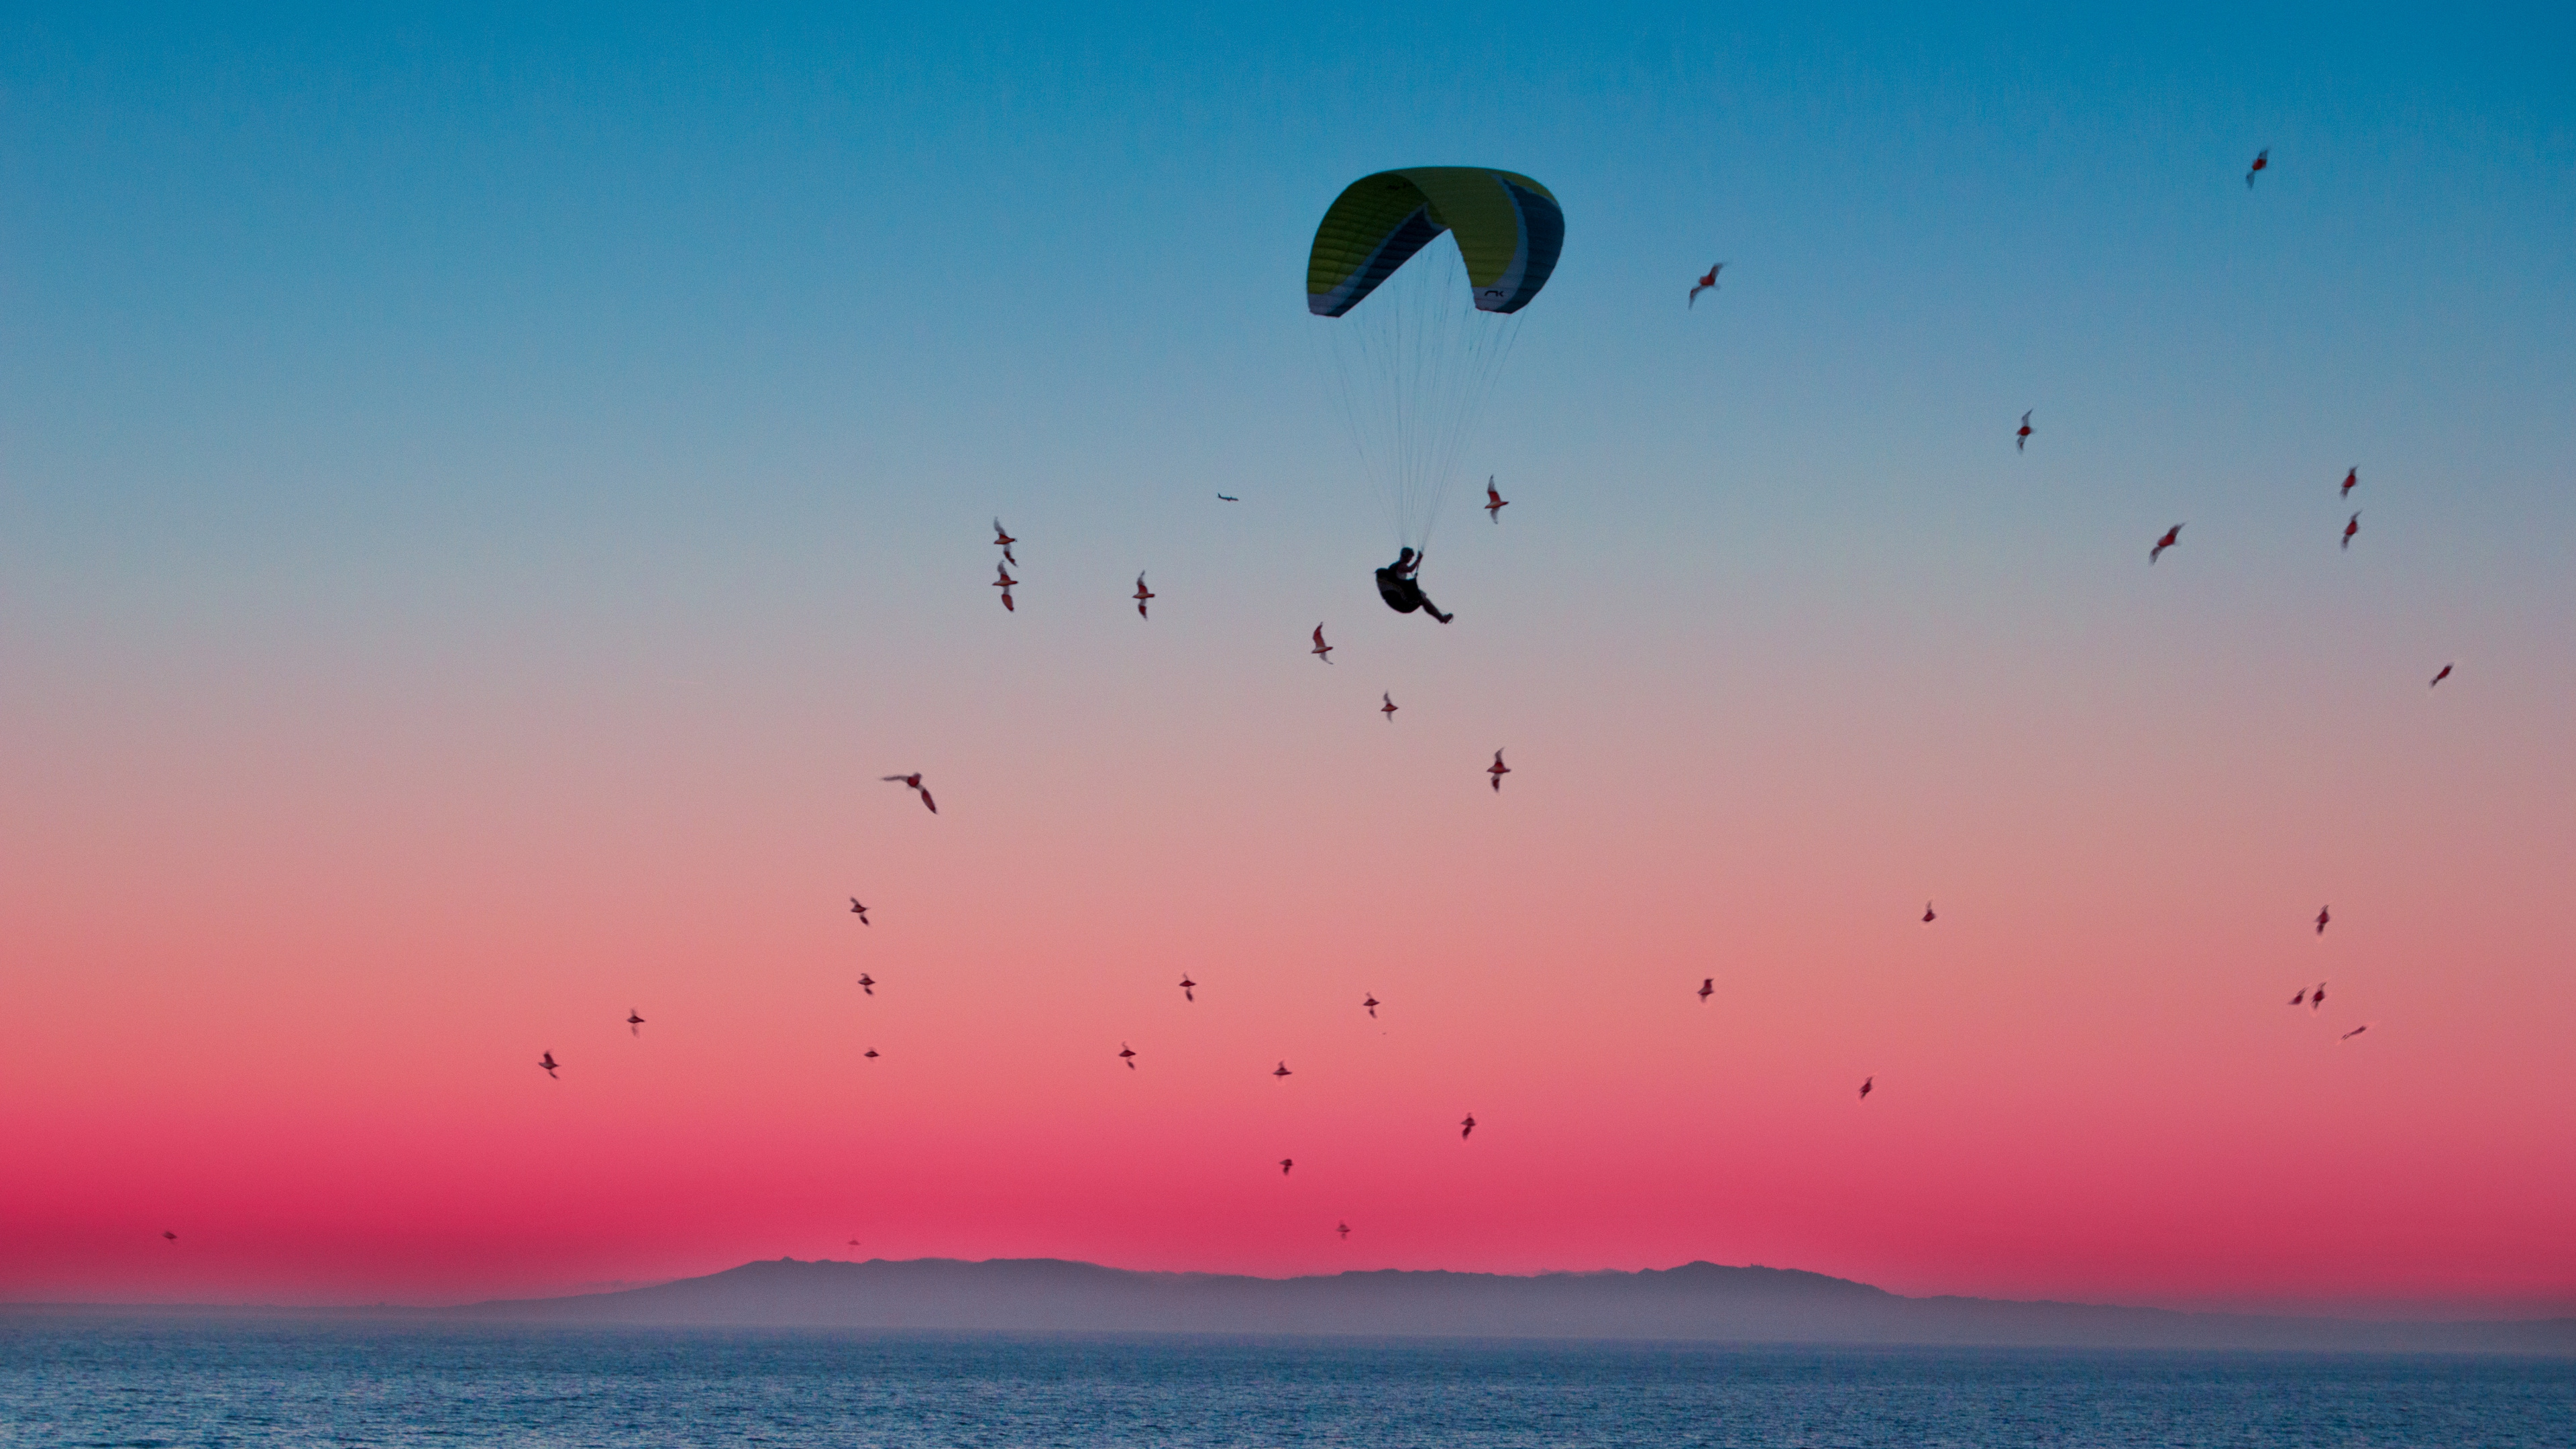 Birds Flying Over The Sea During Sunset. Wallpaper in 3840x2160 Resolution